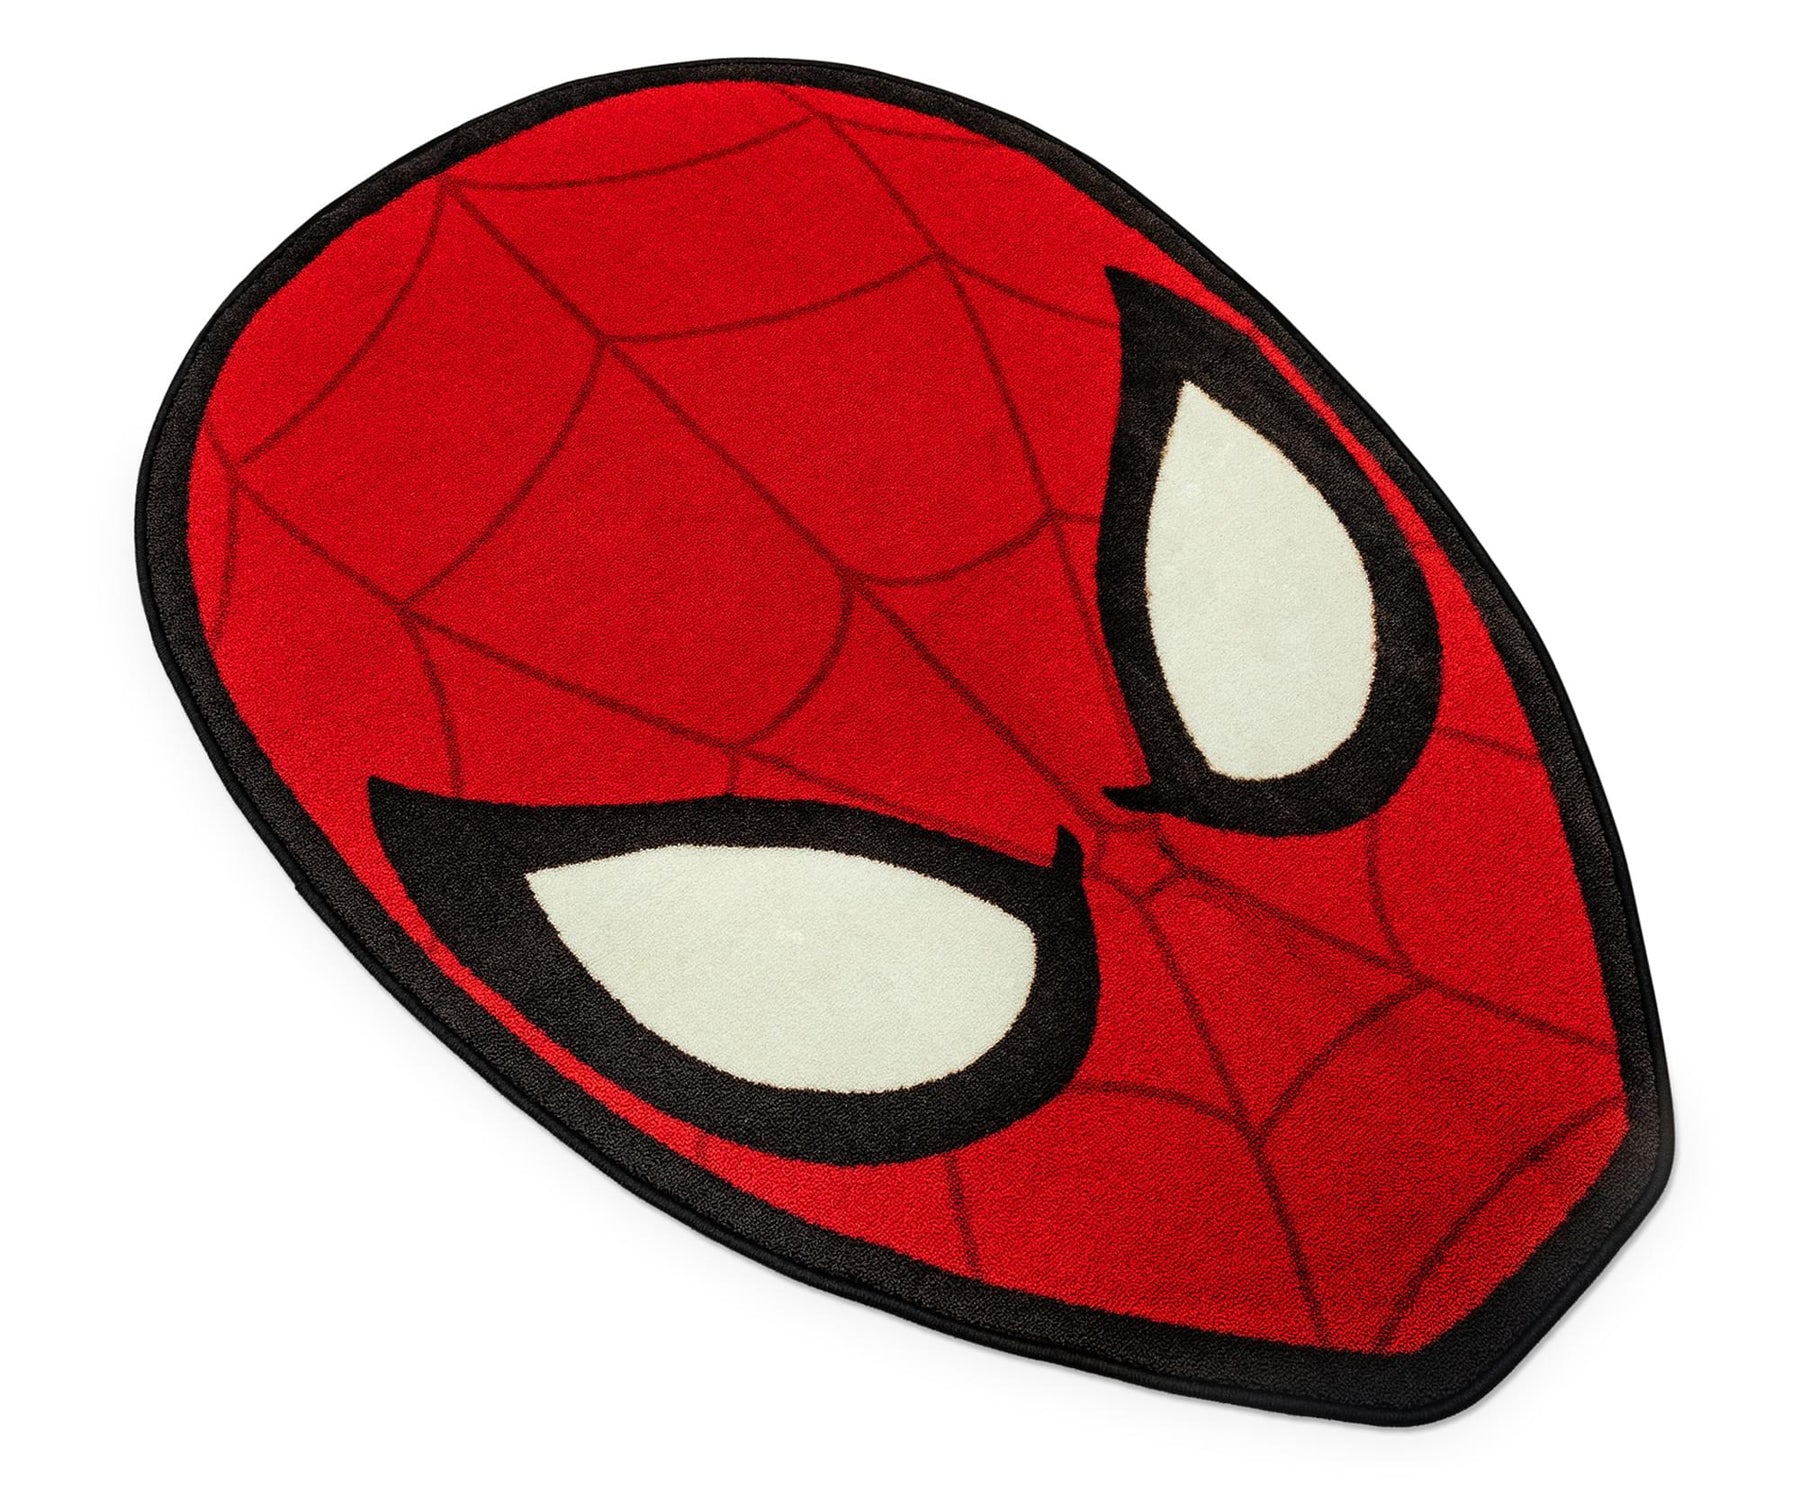 Marvel Spider-Man Mask Printed Area Rug | 52 x 35 Inches